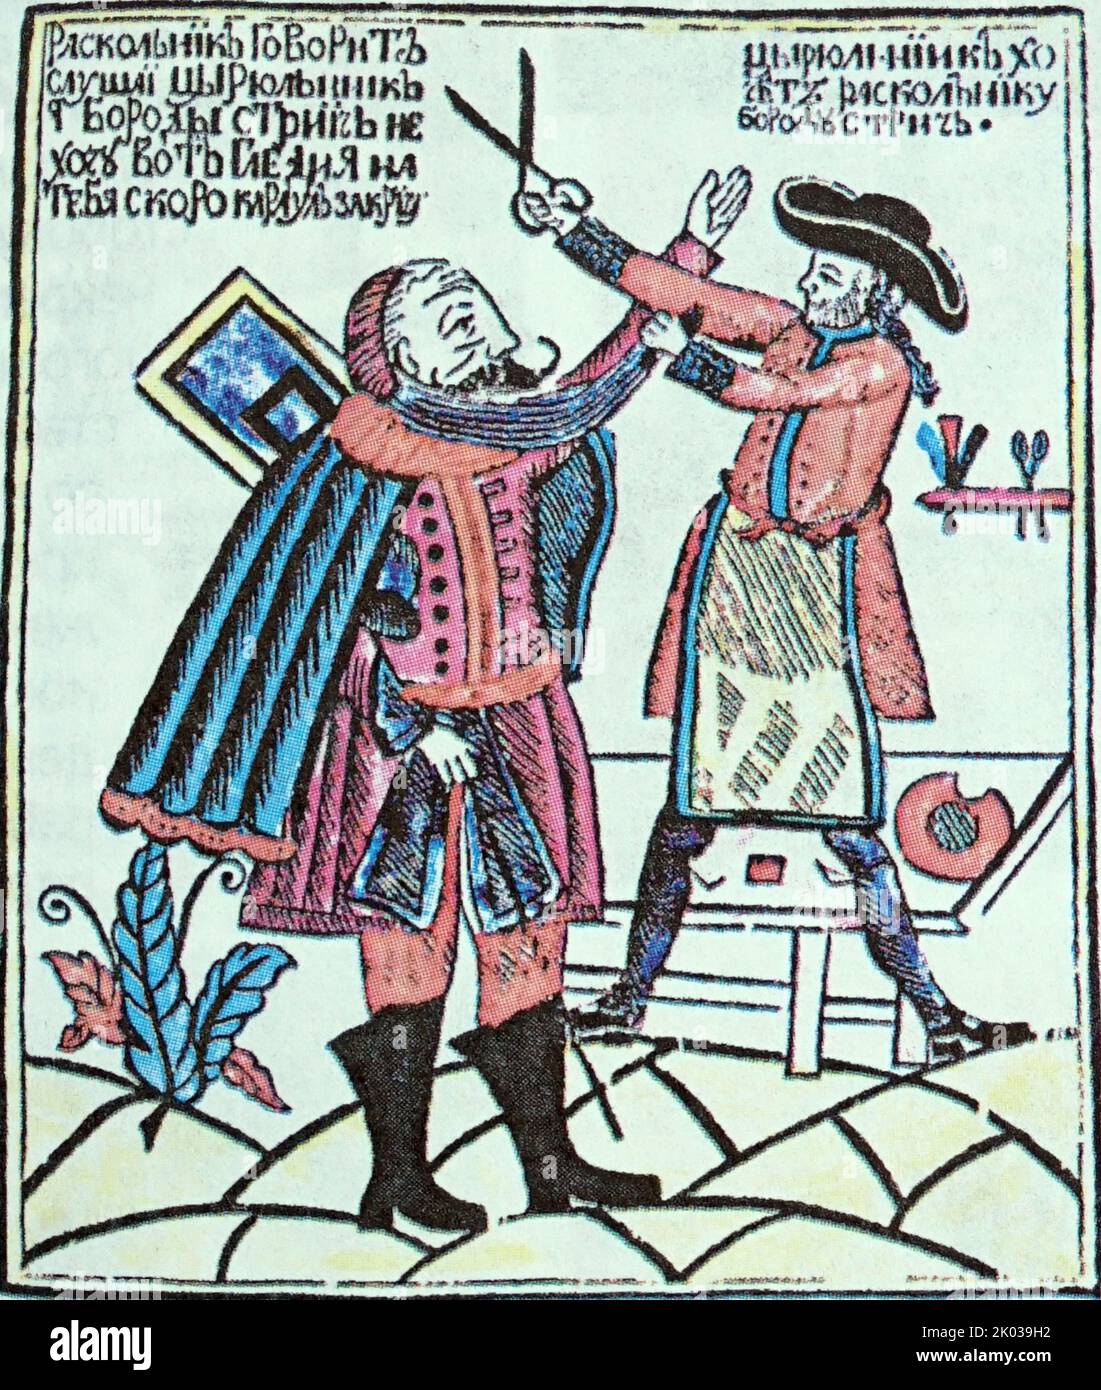 Cutting off the beard. Peter the Great as a barber cutting off the beard of an unhappy boyar in his determination to westernize Russia, c1705. Satirical Russian Cartoon, 18th century. Stock Photo